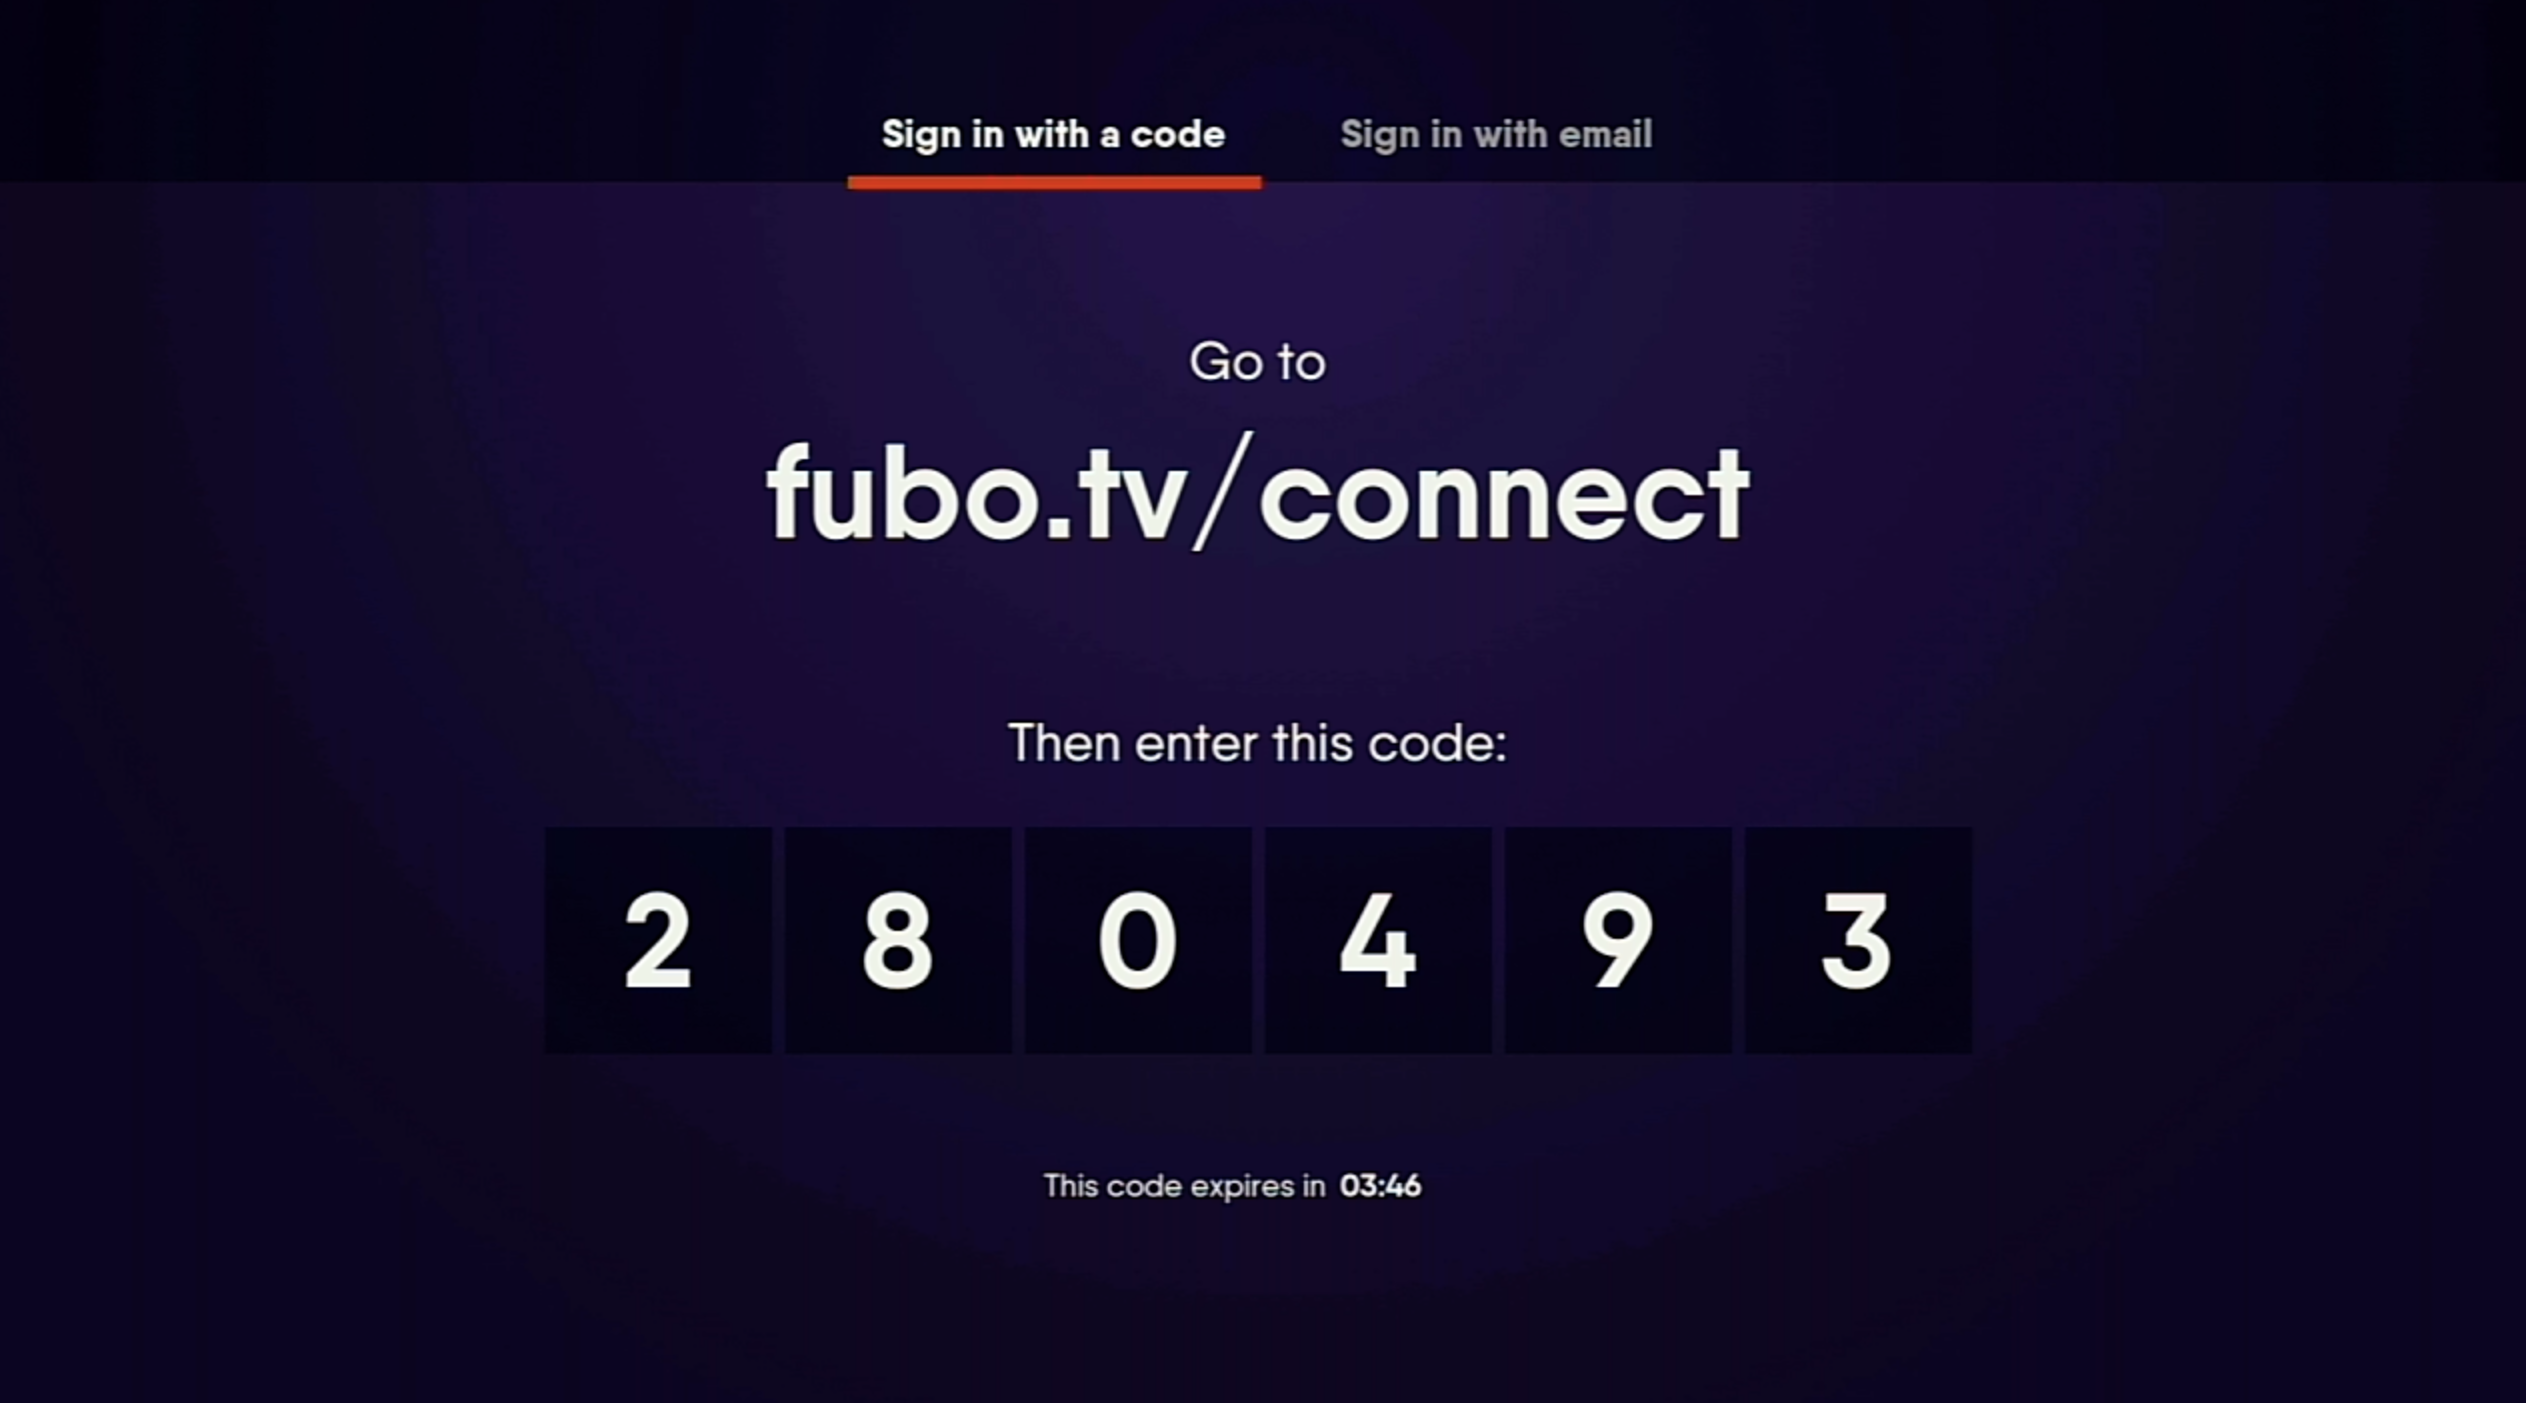 Sample activation code; visit fubo.tv/connect from a computer or mobile device and enter the code to automatically activate FuboTV on the Roku